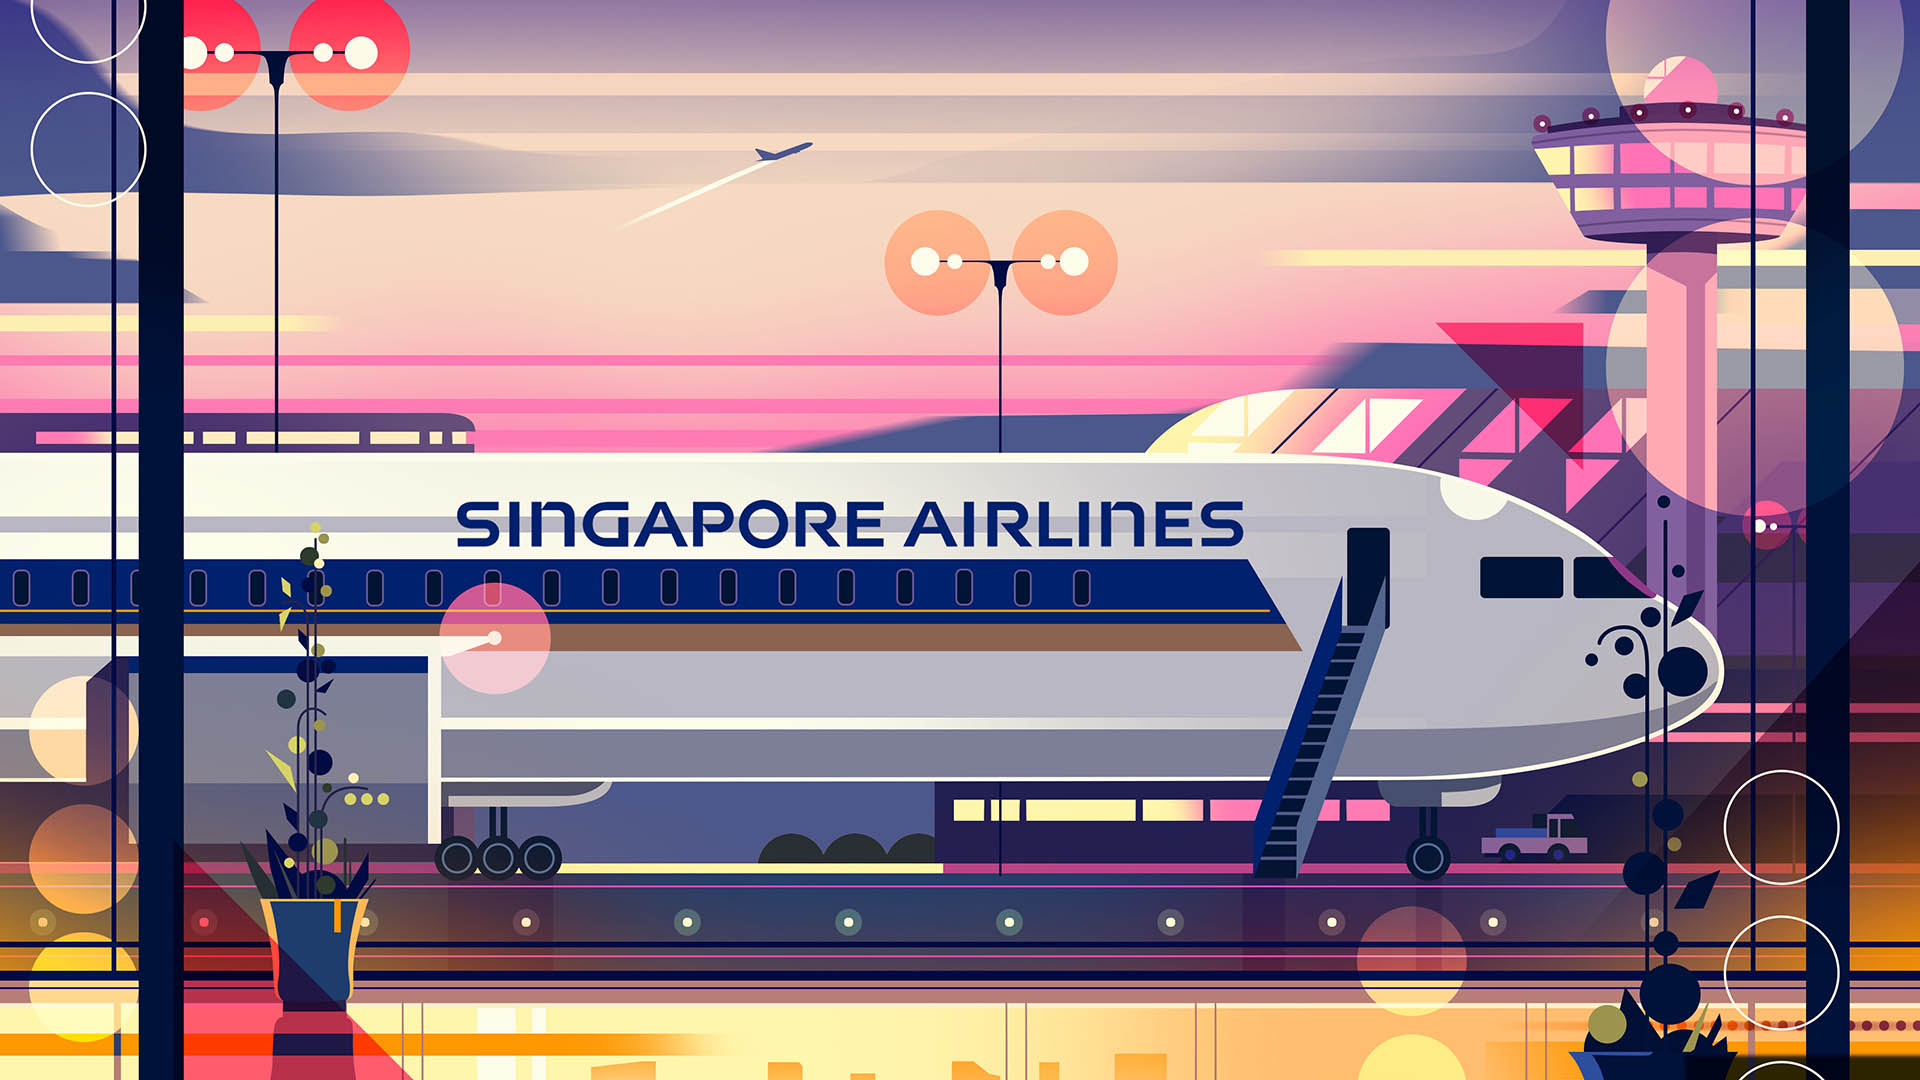 The New York Times + Singapore Airlines